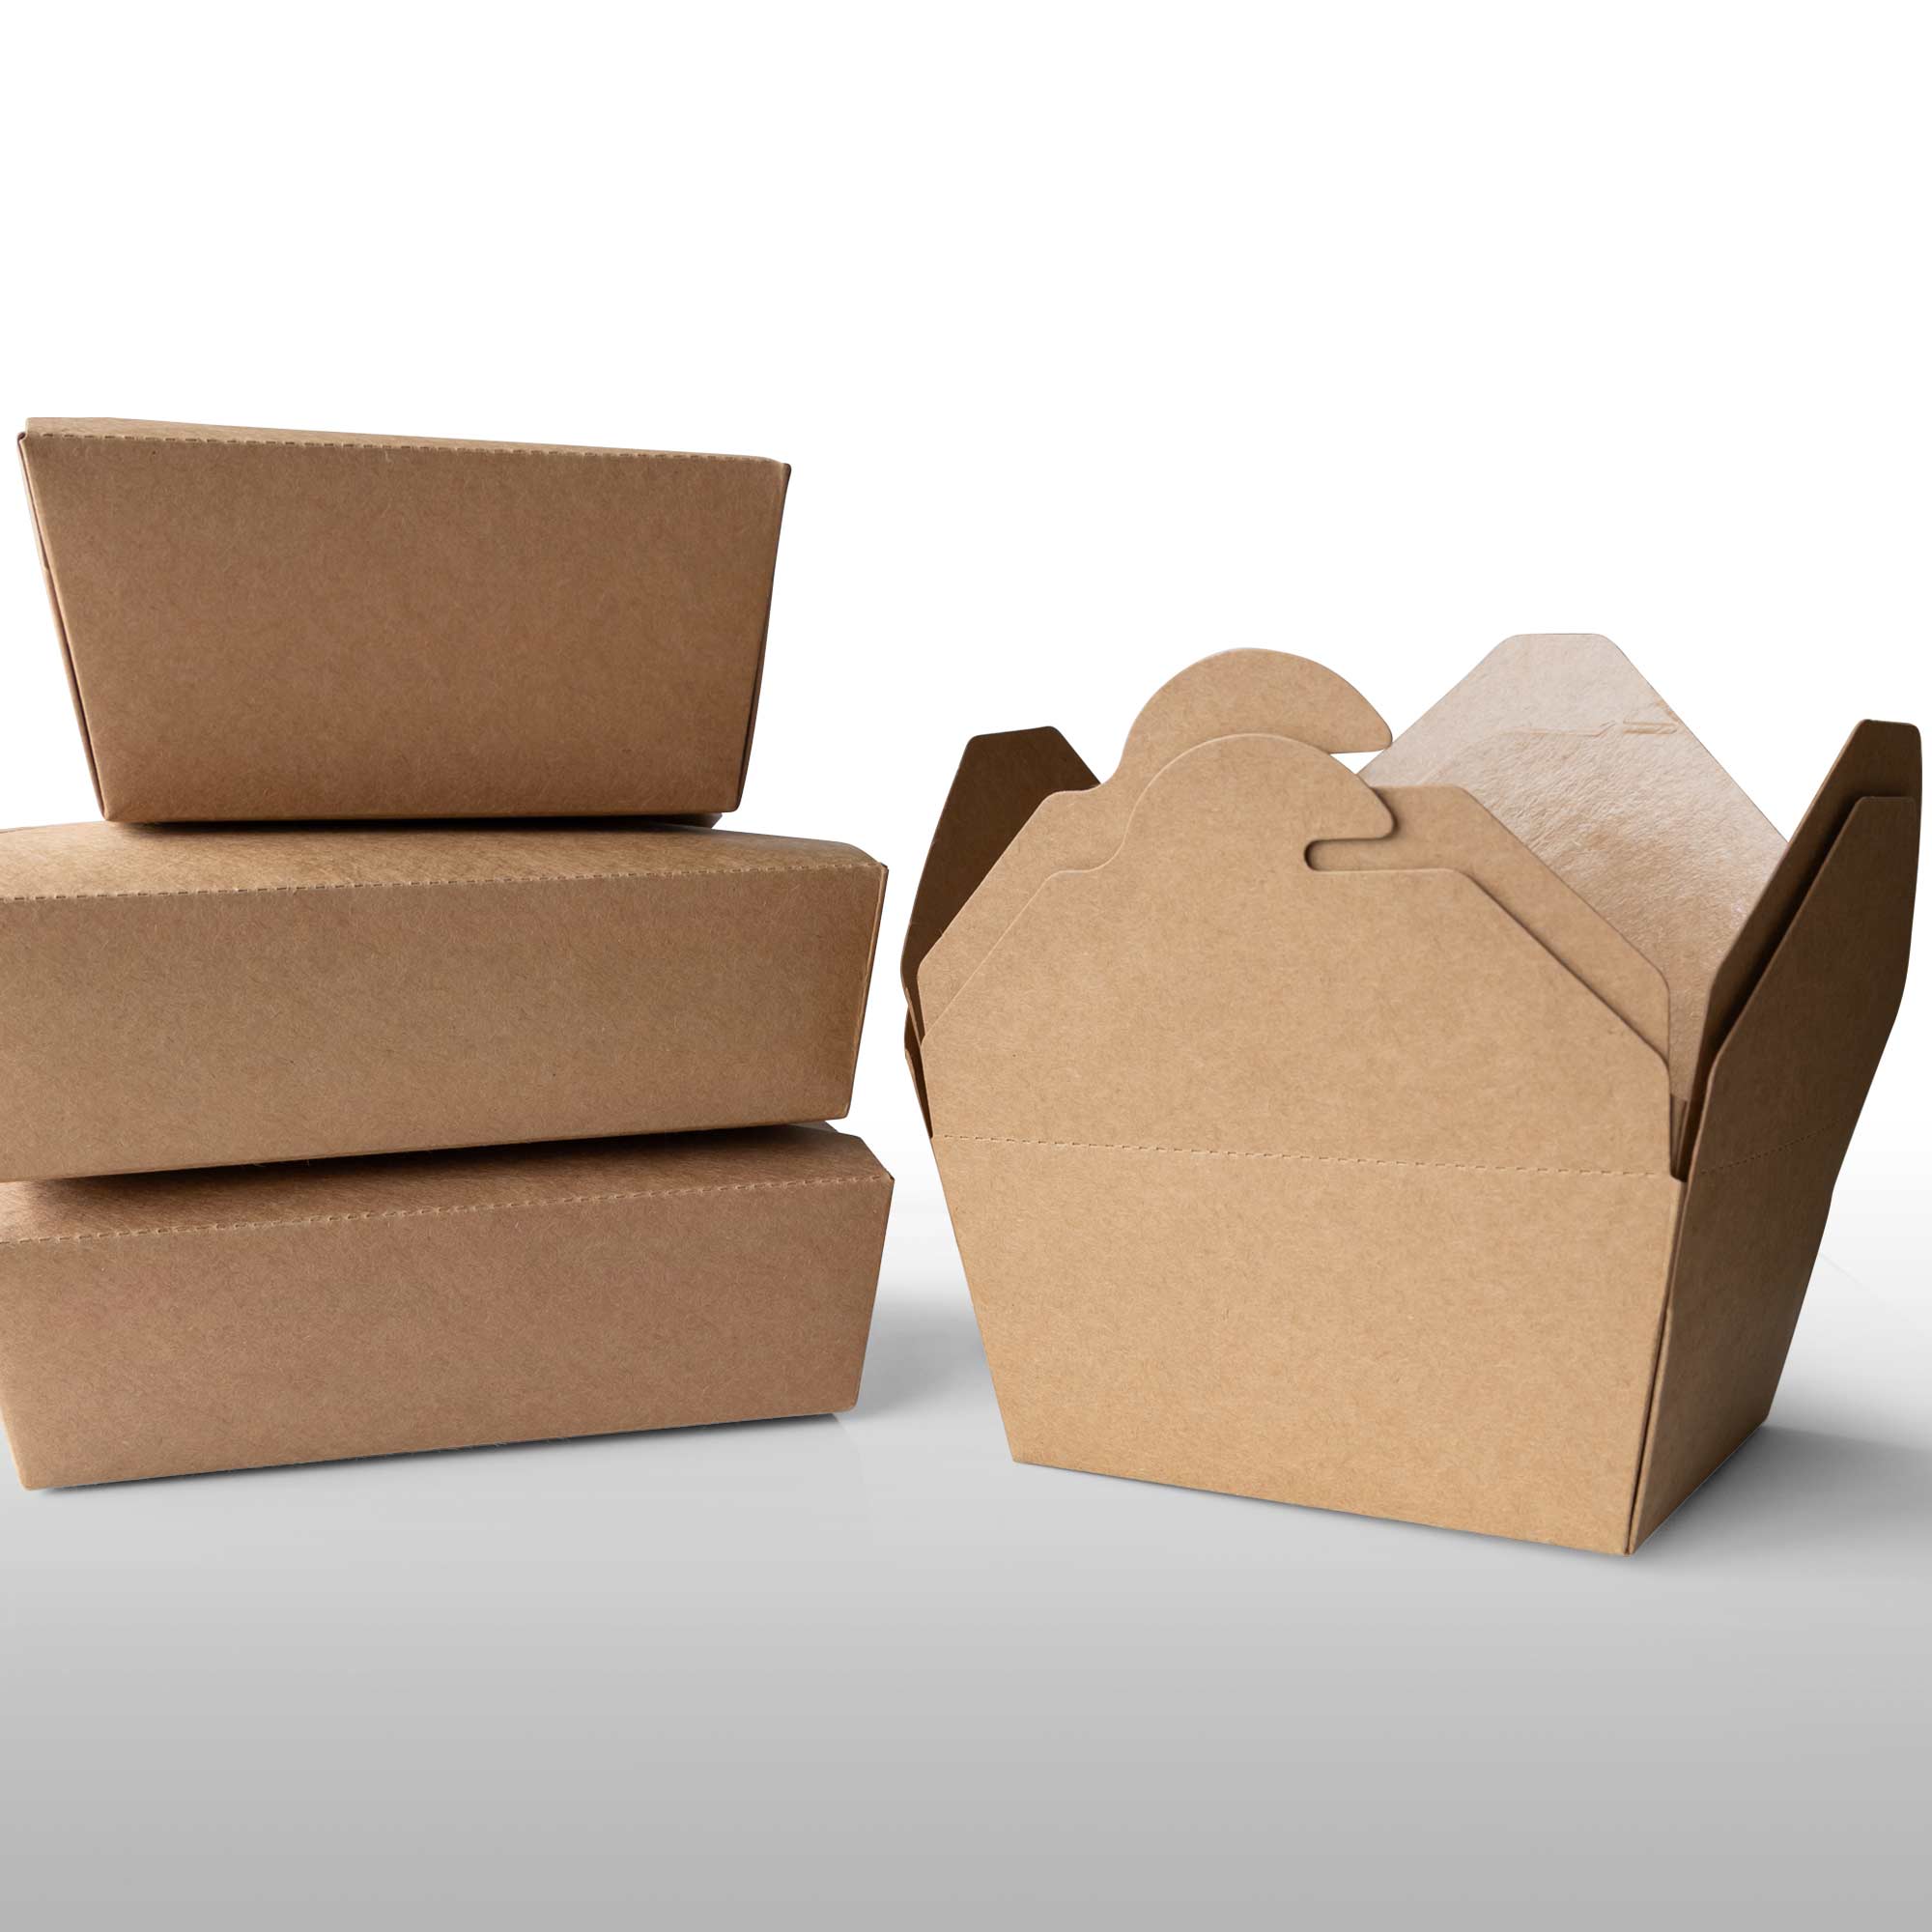 Paper Meal Box, Soup Container